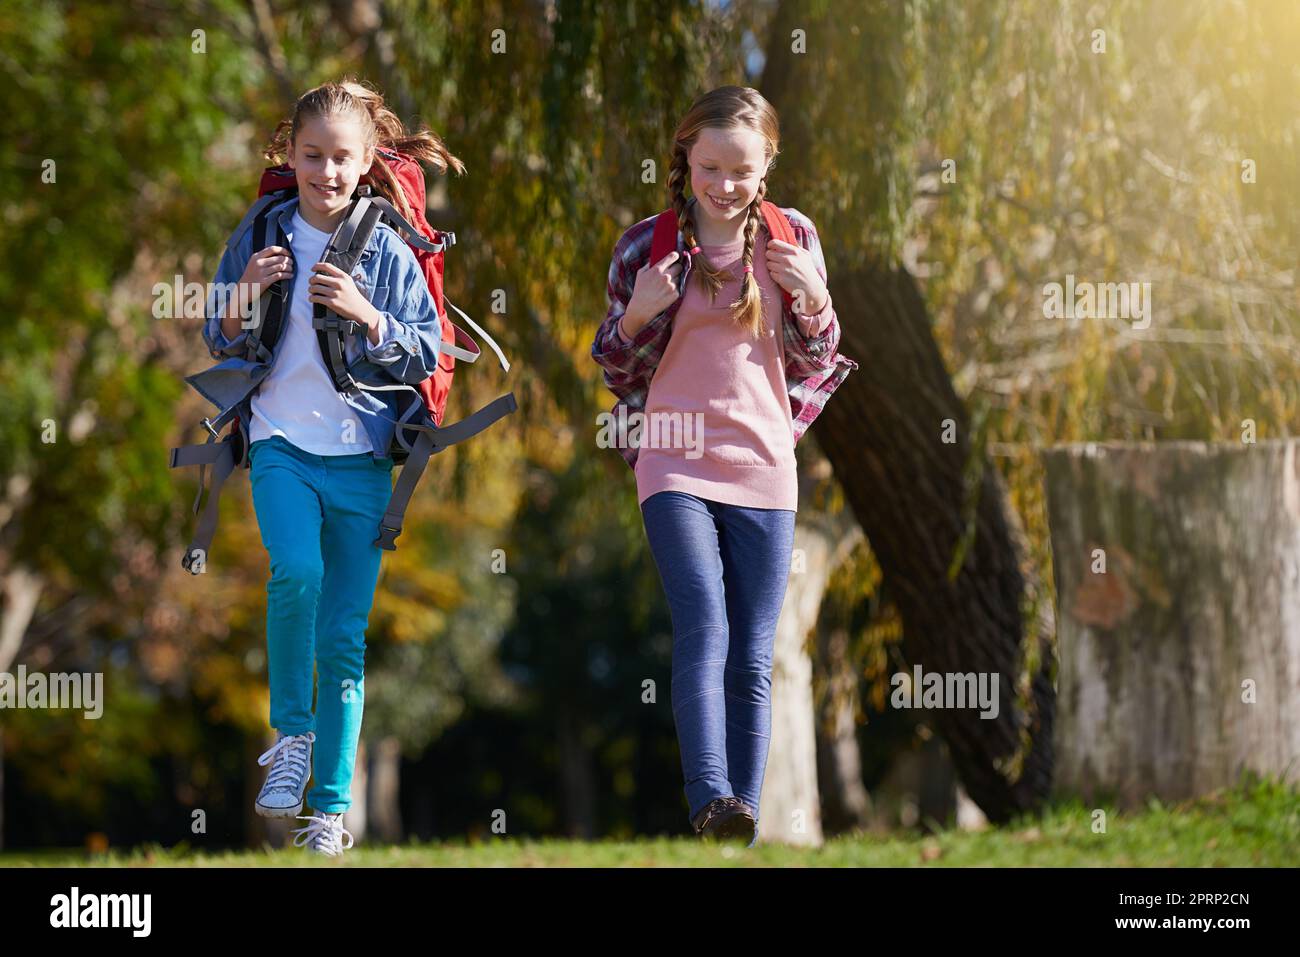 And so the adventure begins...two young girls wearing backpacks walking together in nature. Stock Photo